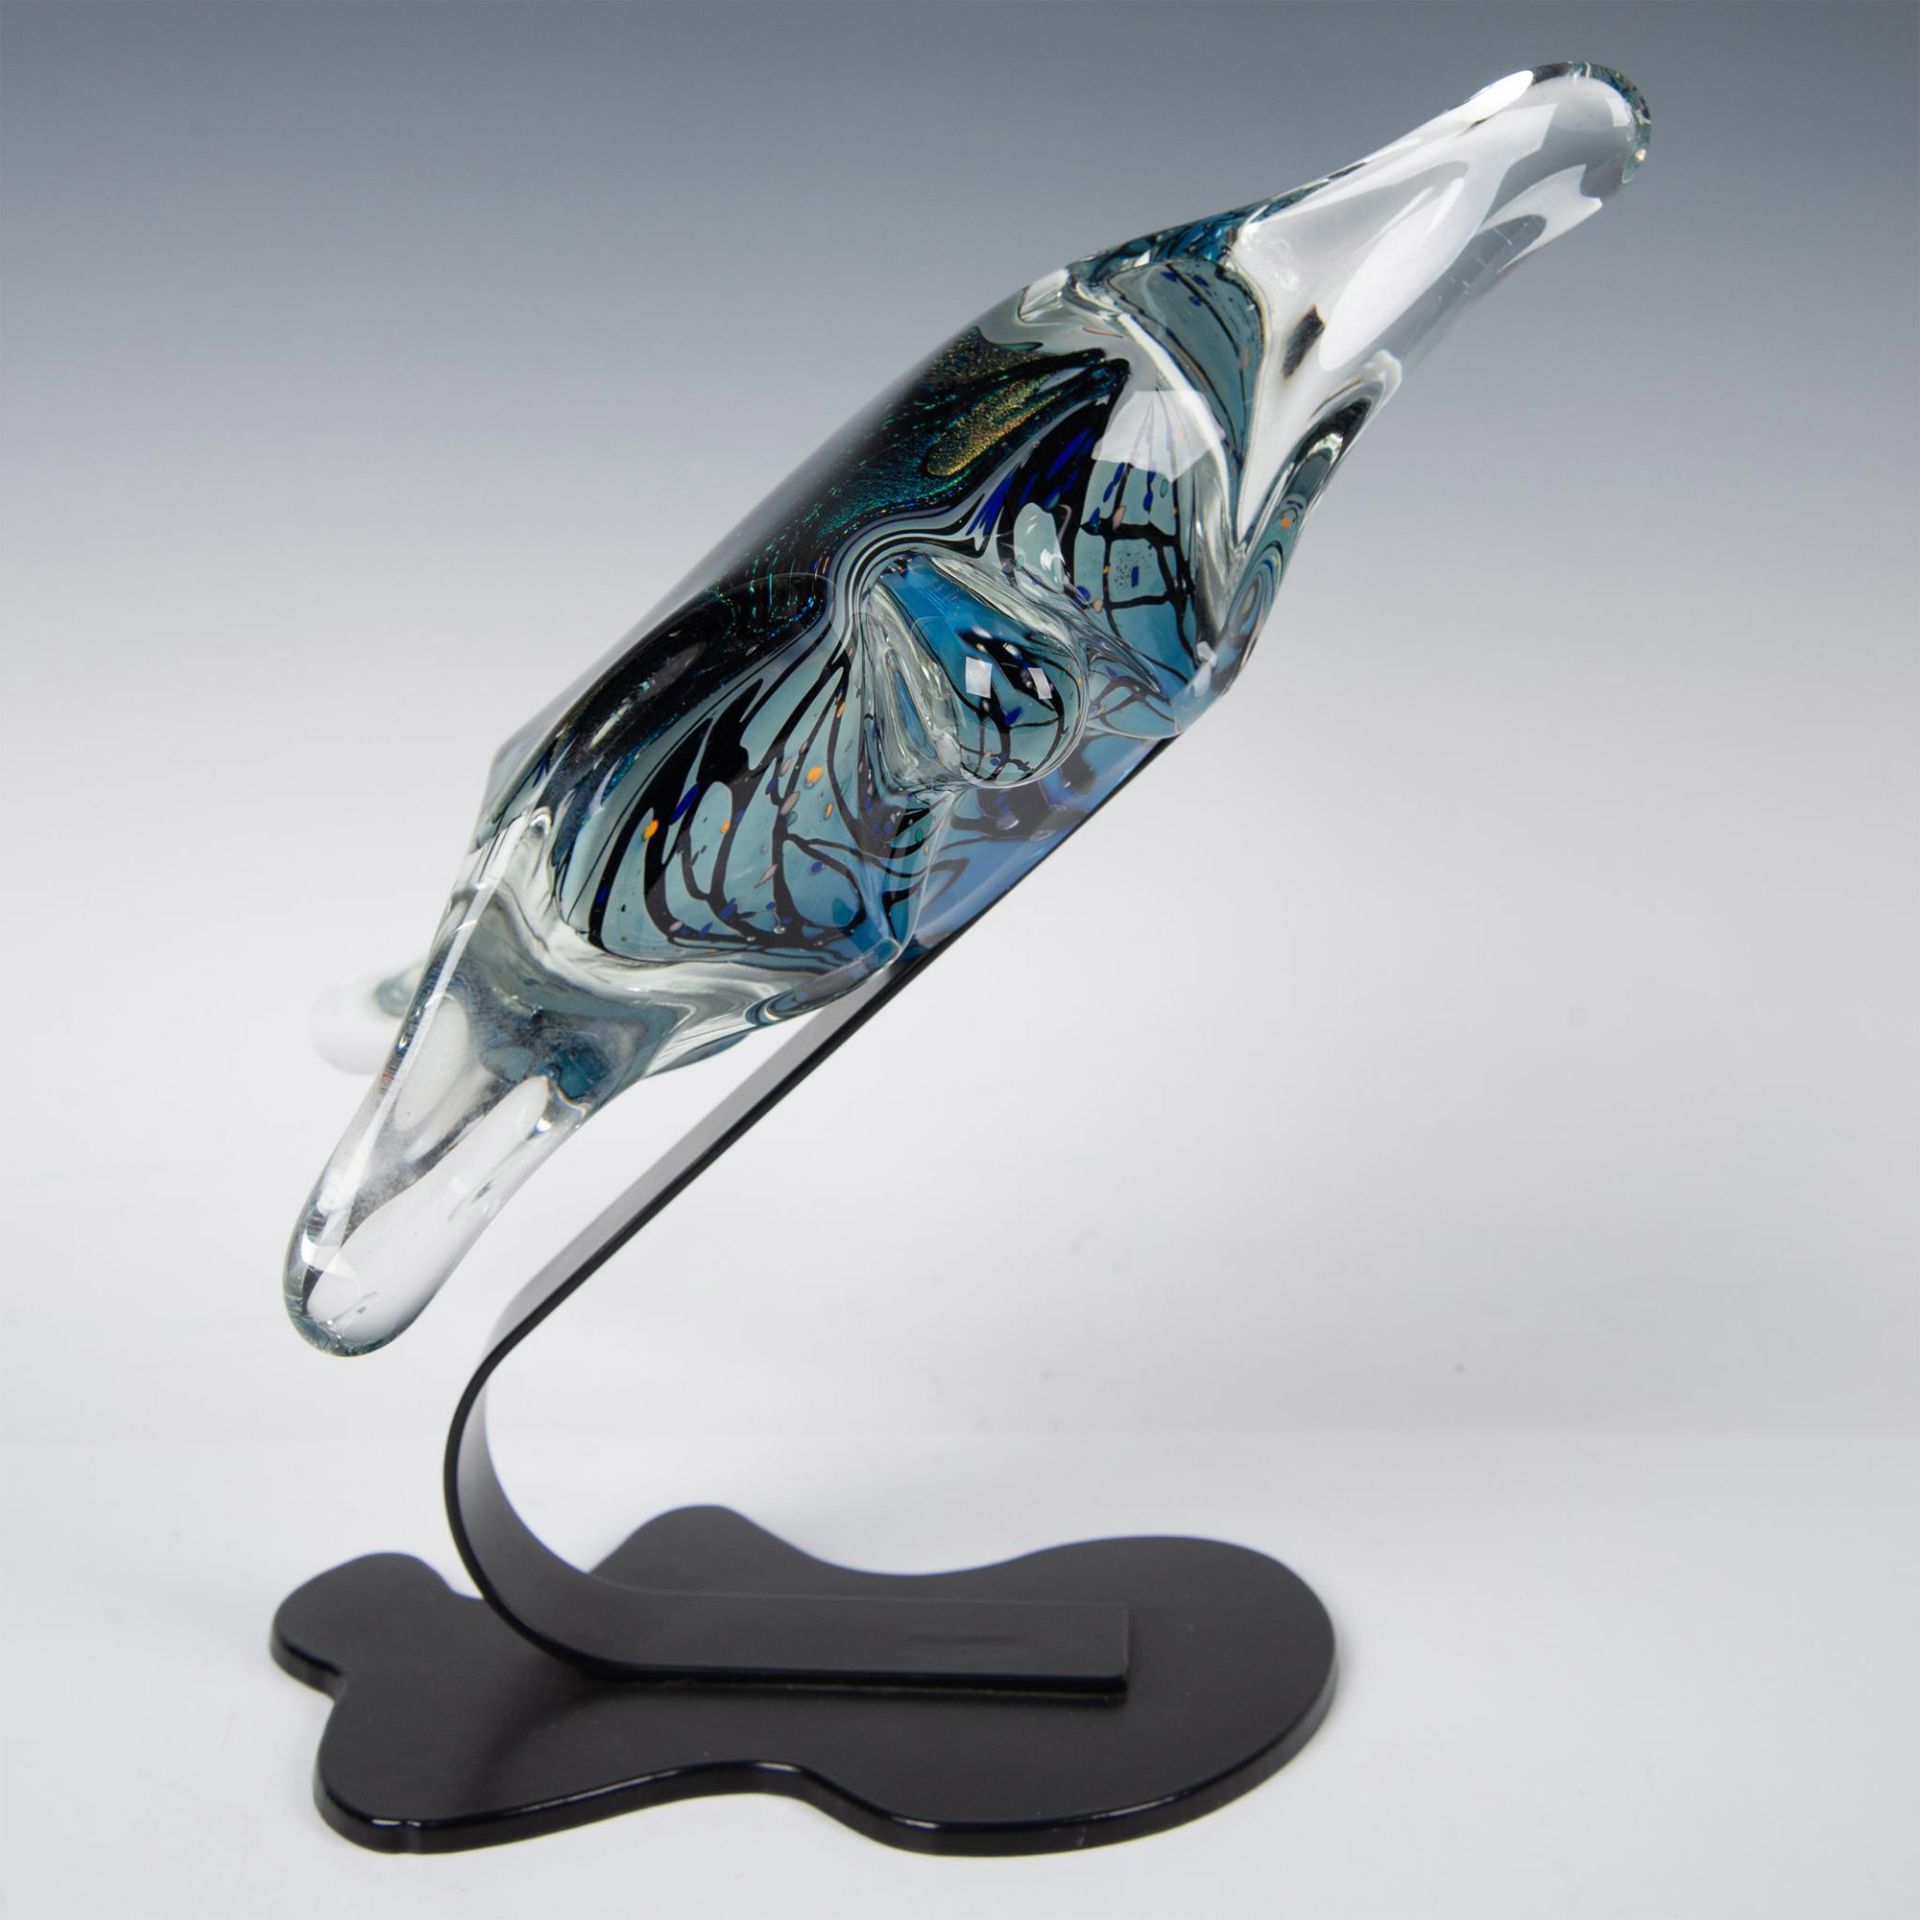 Rollin Karg Dichroic Art Glass Sculpture on Stand, Signed - Image 5 of 5